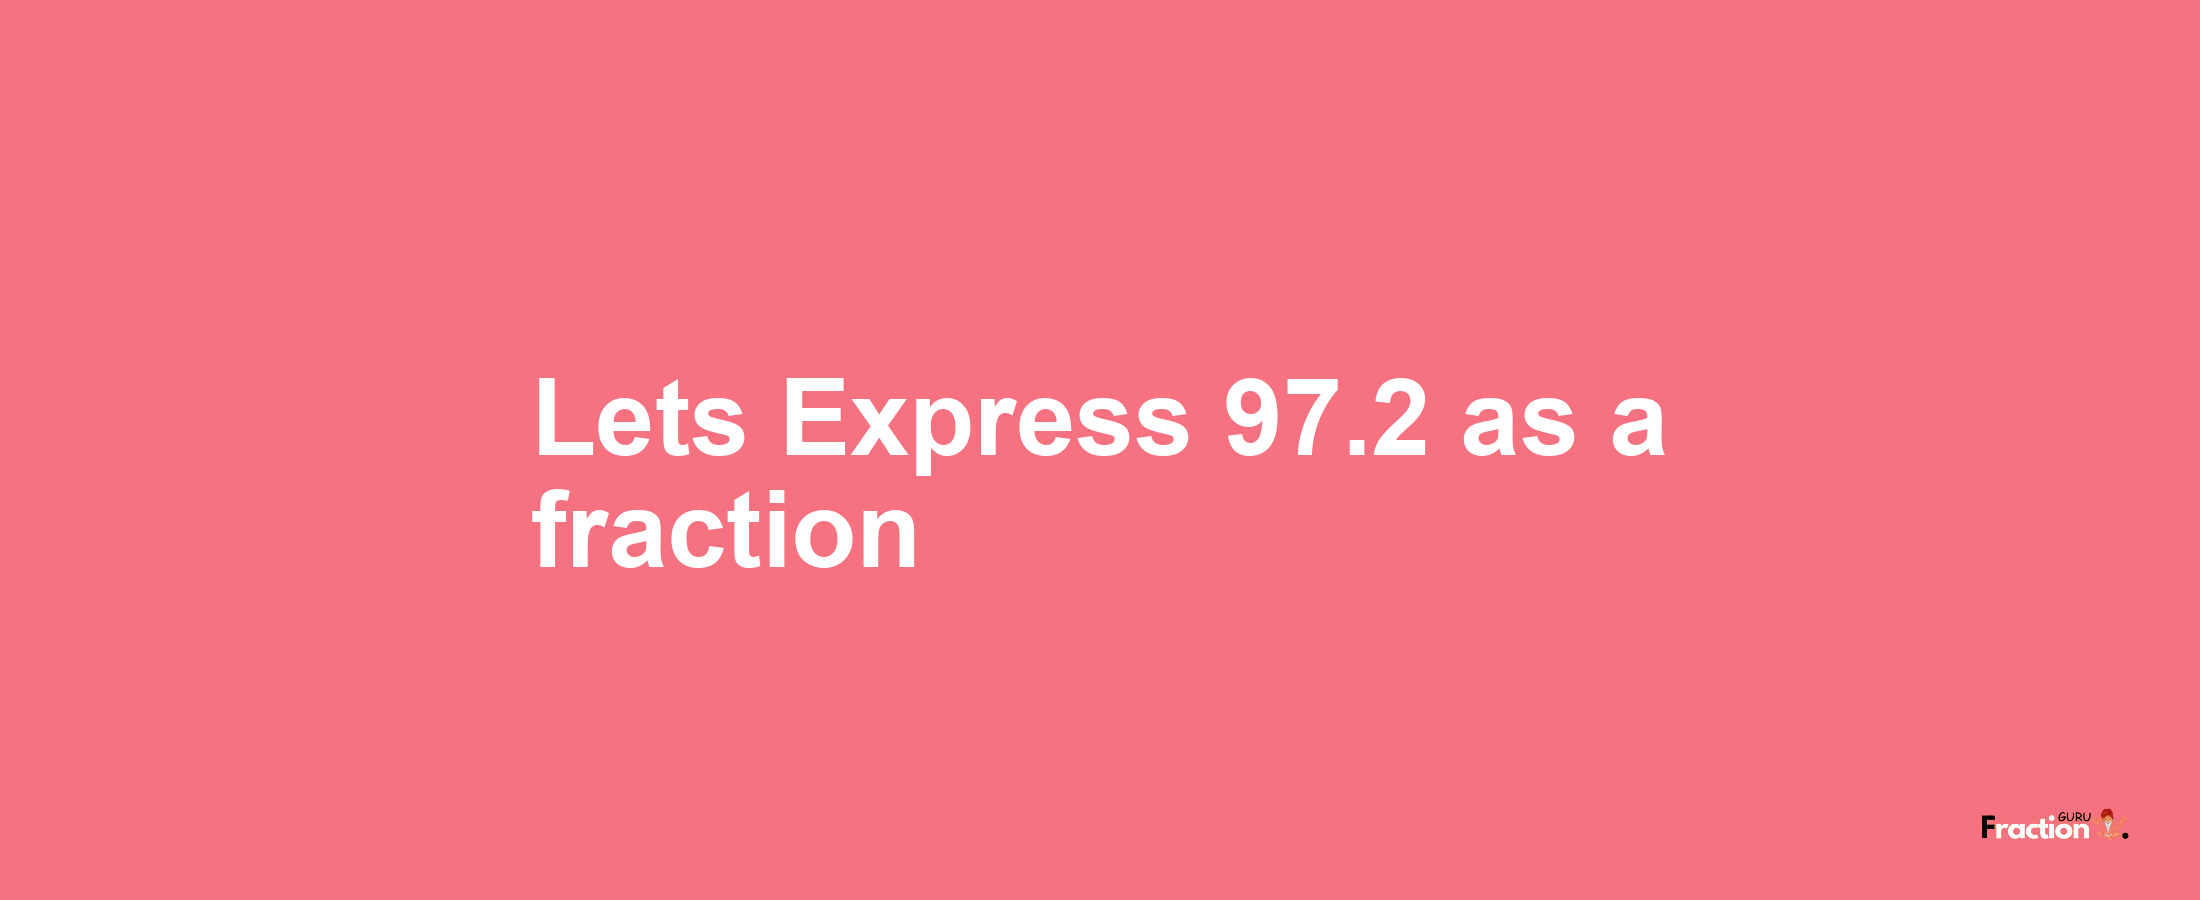 Lets Express 97.2 as afraction